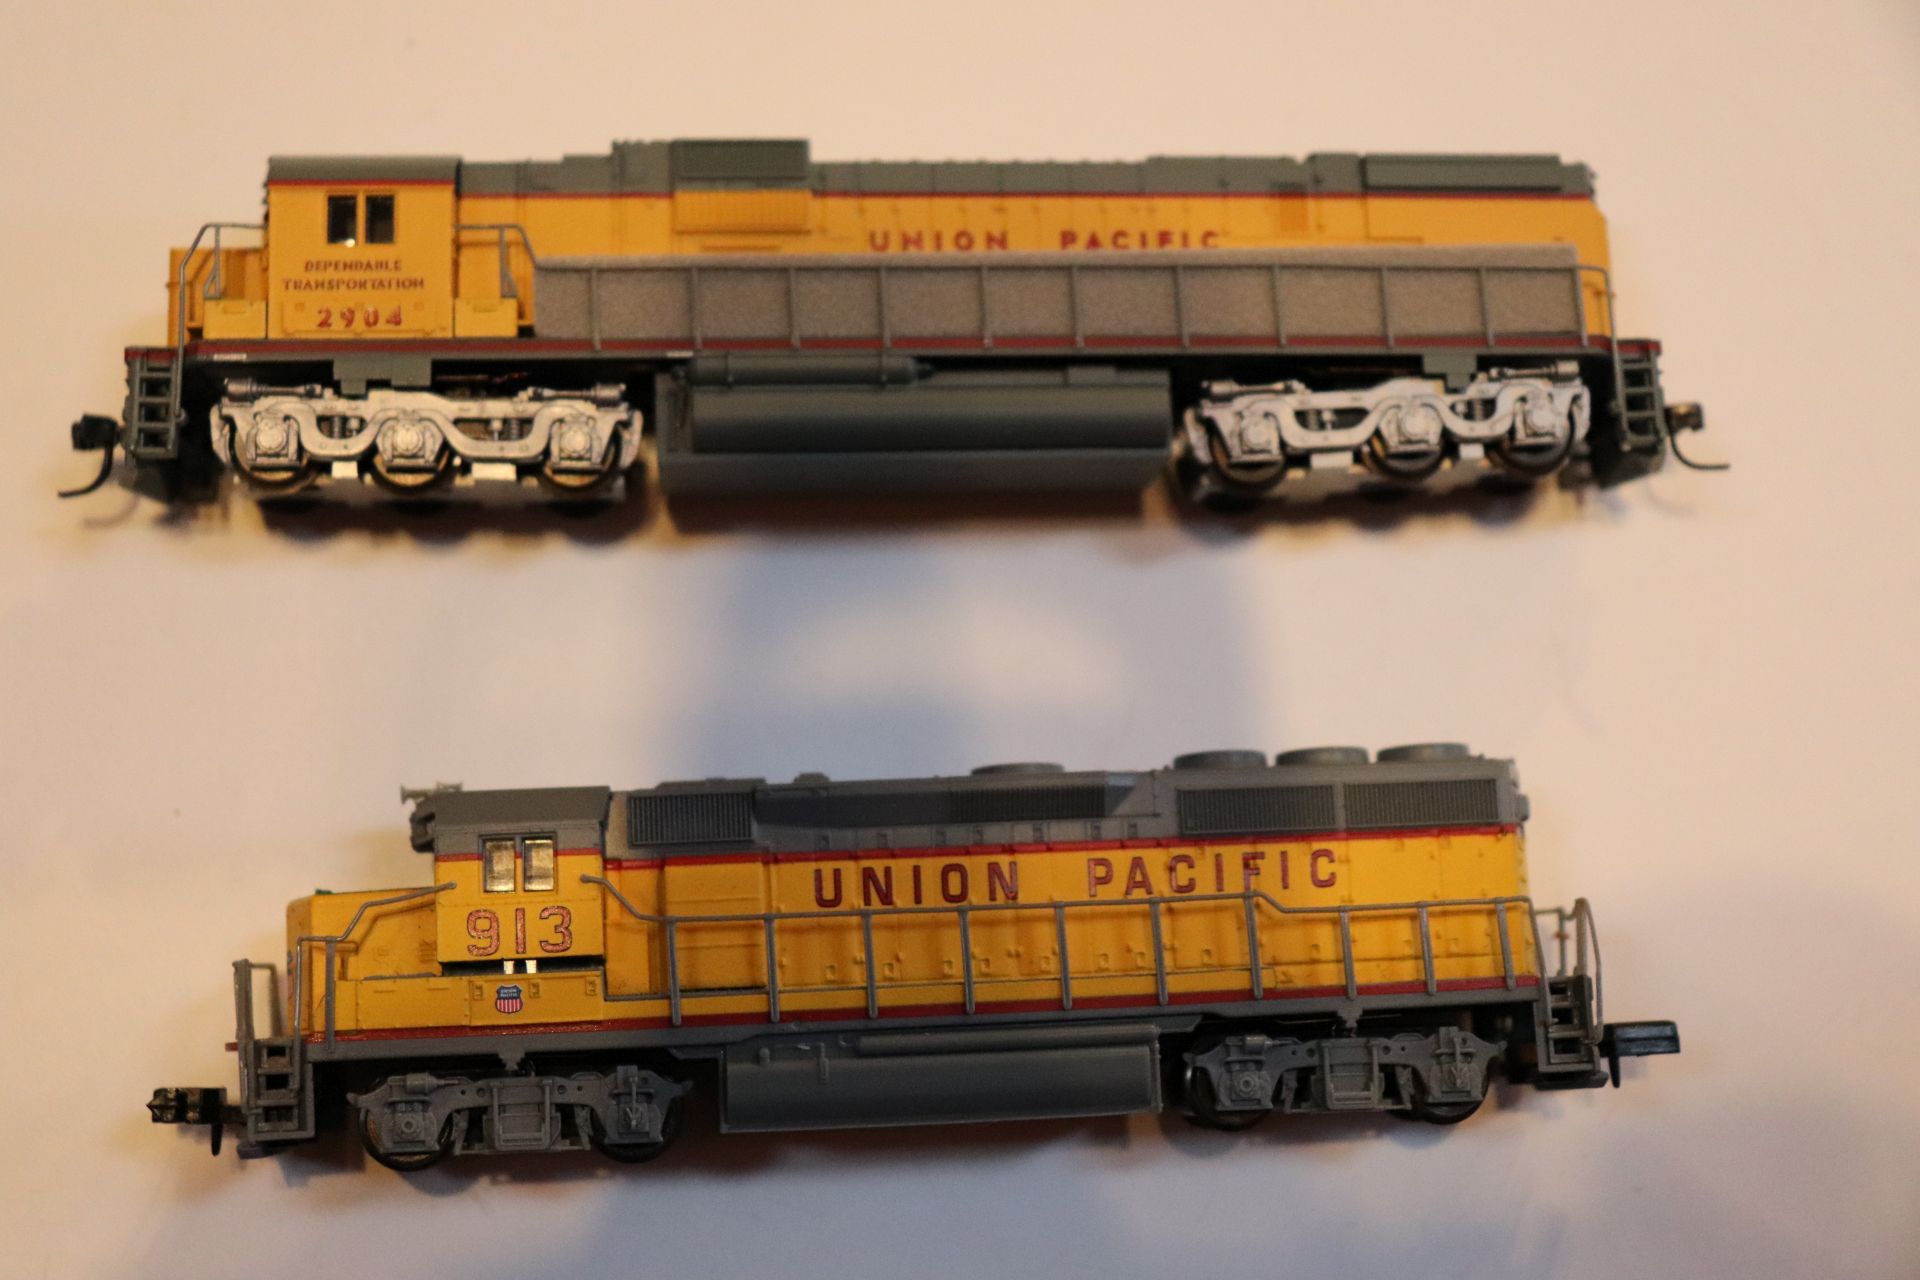 Two Atlas Union Pacific locomotives, 2904 and 913, N scale